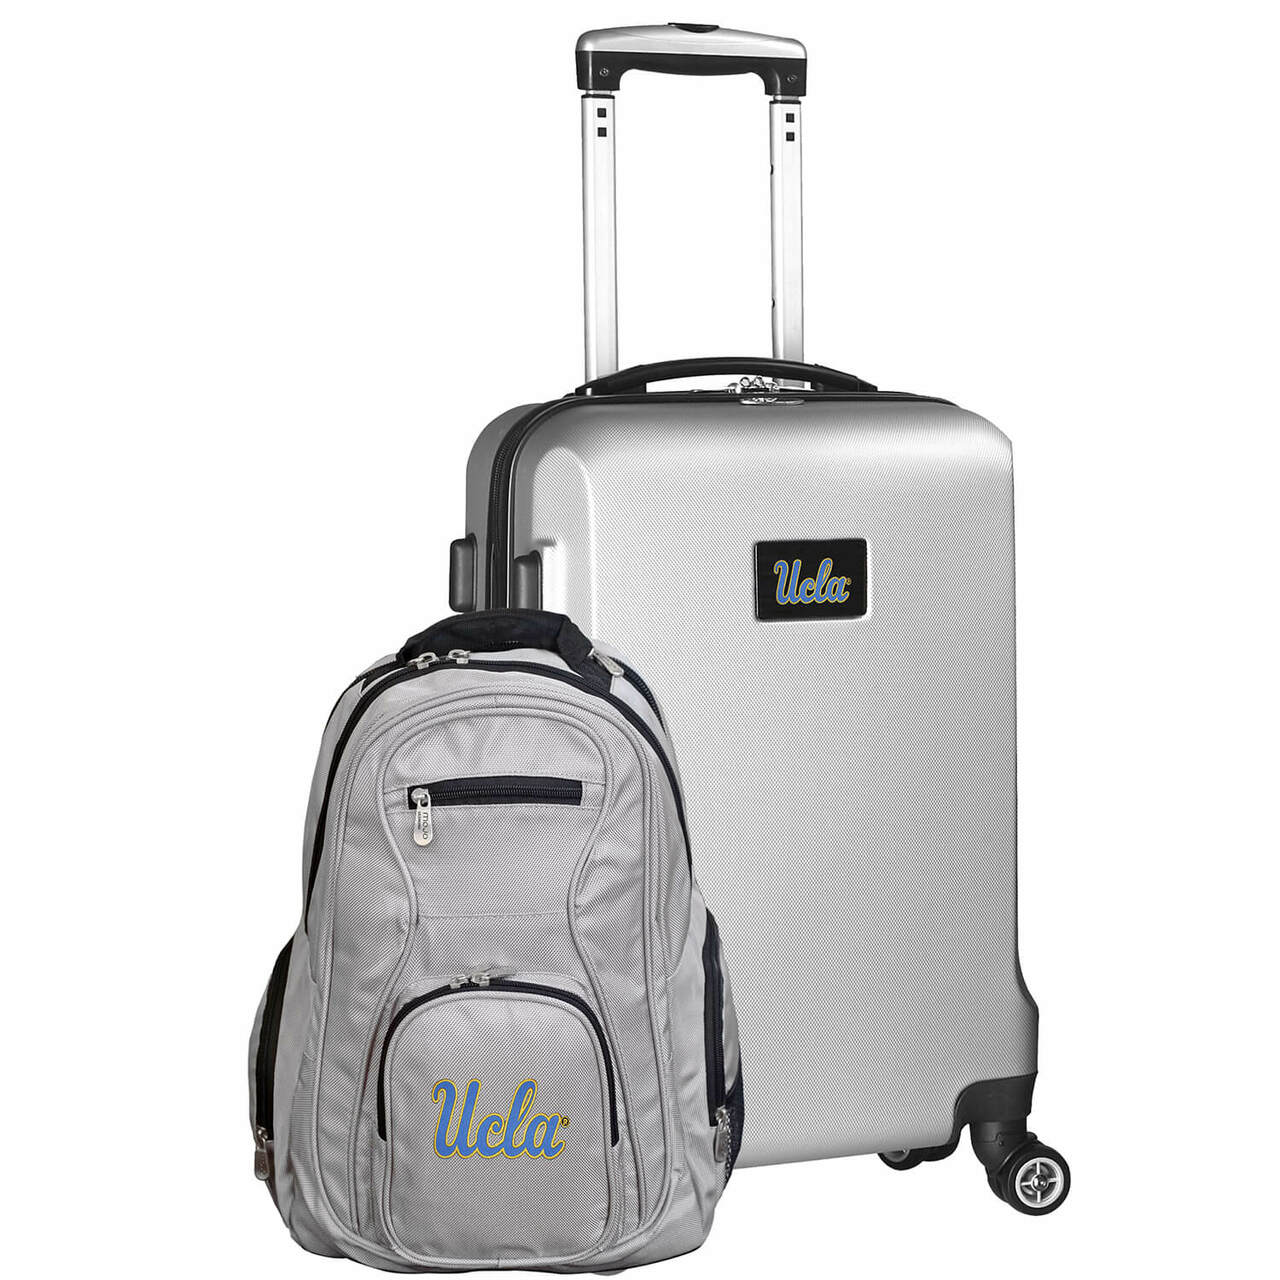 UCLA Bruins Deluxe 2-Piece Backpack and Carry-on Set